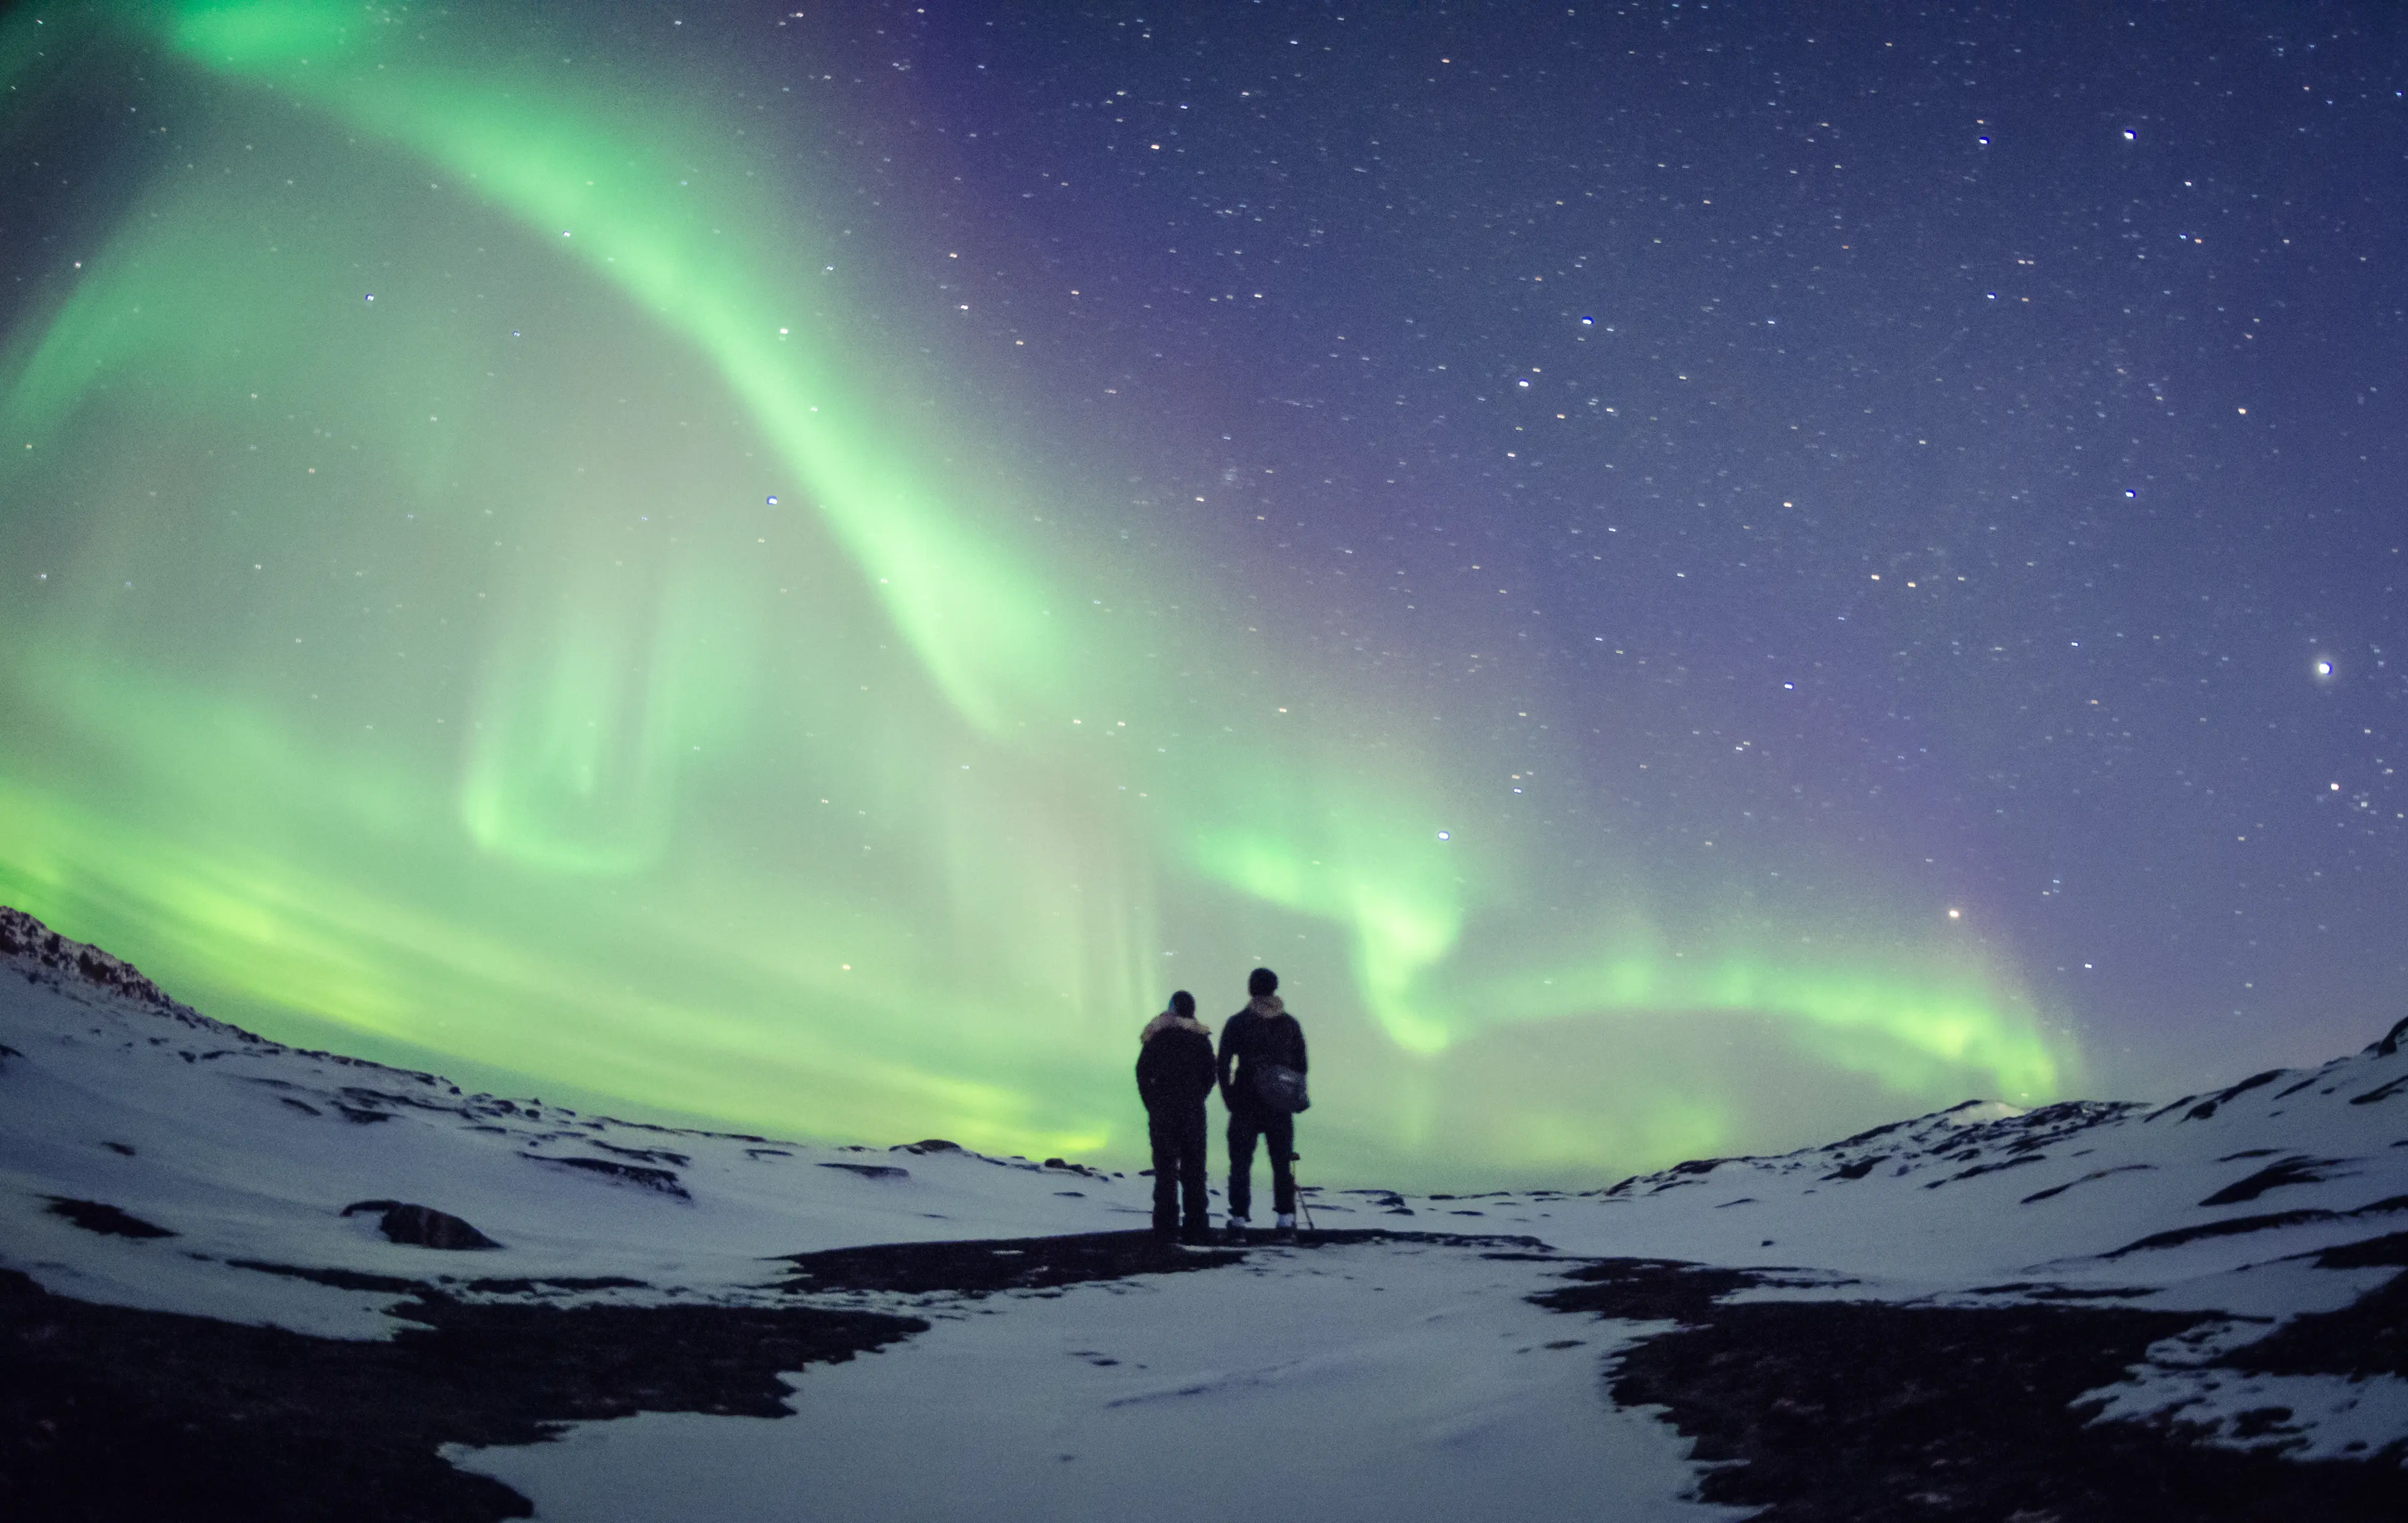 Two people on a snowy hill admiring the Aurora Borealis at night